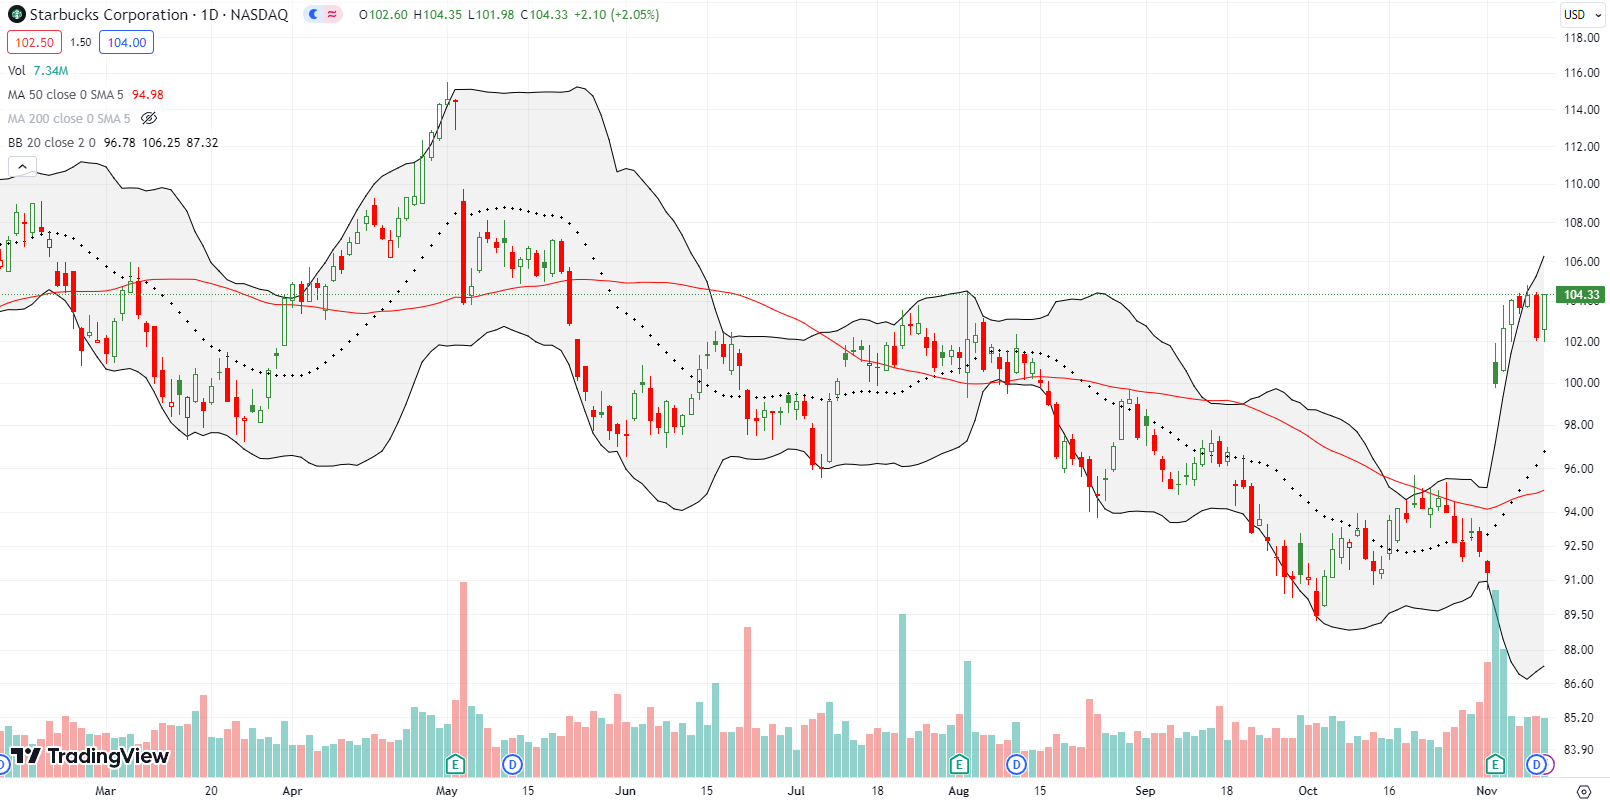 Starbucks Corp (SBUX) hung near the upper Bollinger Band, keeping its post-earnings momentum.